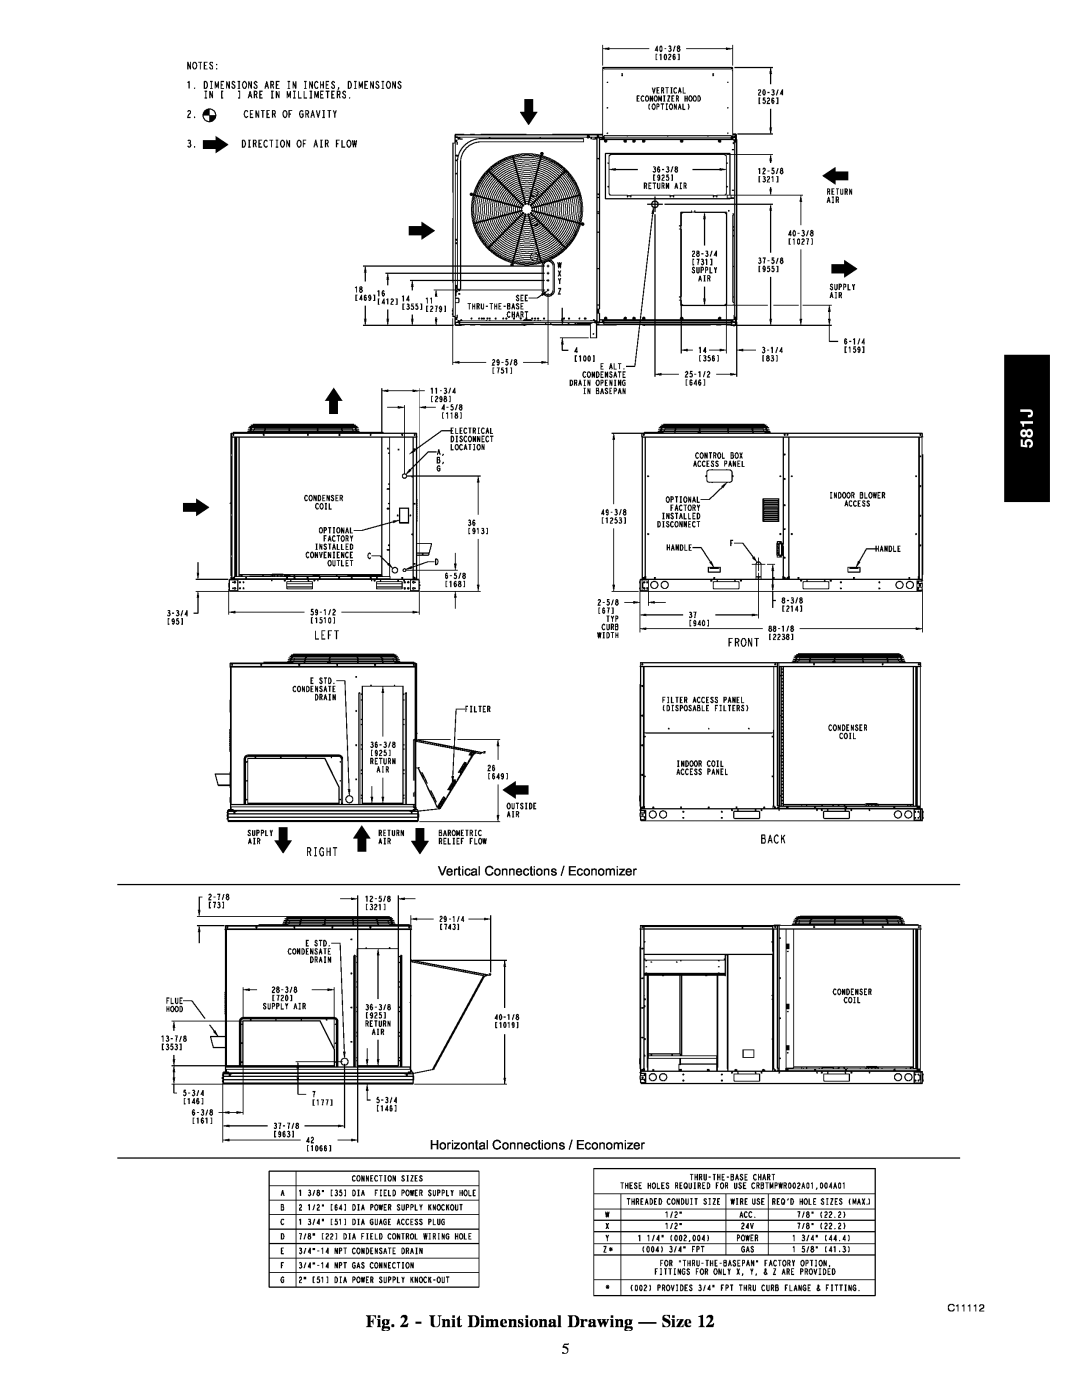 Bryant 581J installation instructions Unit Dimensional Drawing - Size, Vertical Connections / Economizer 